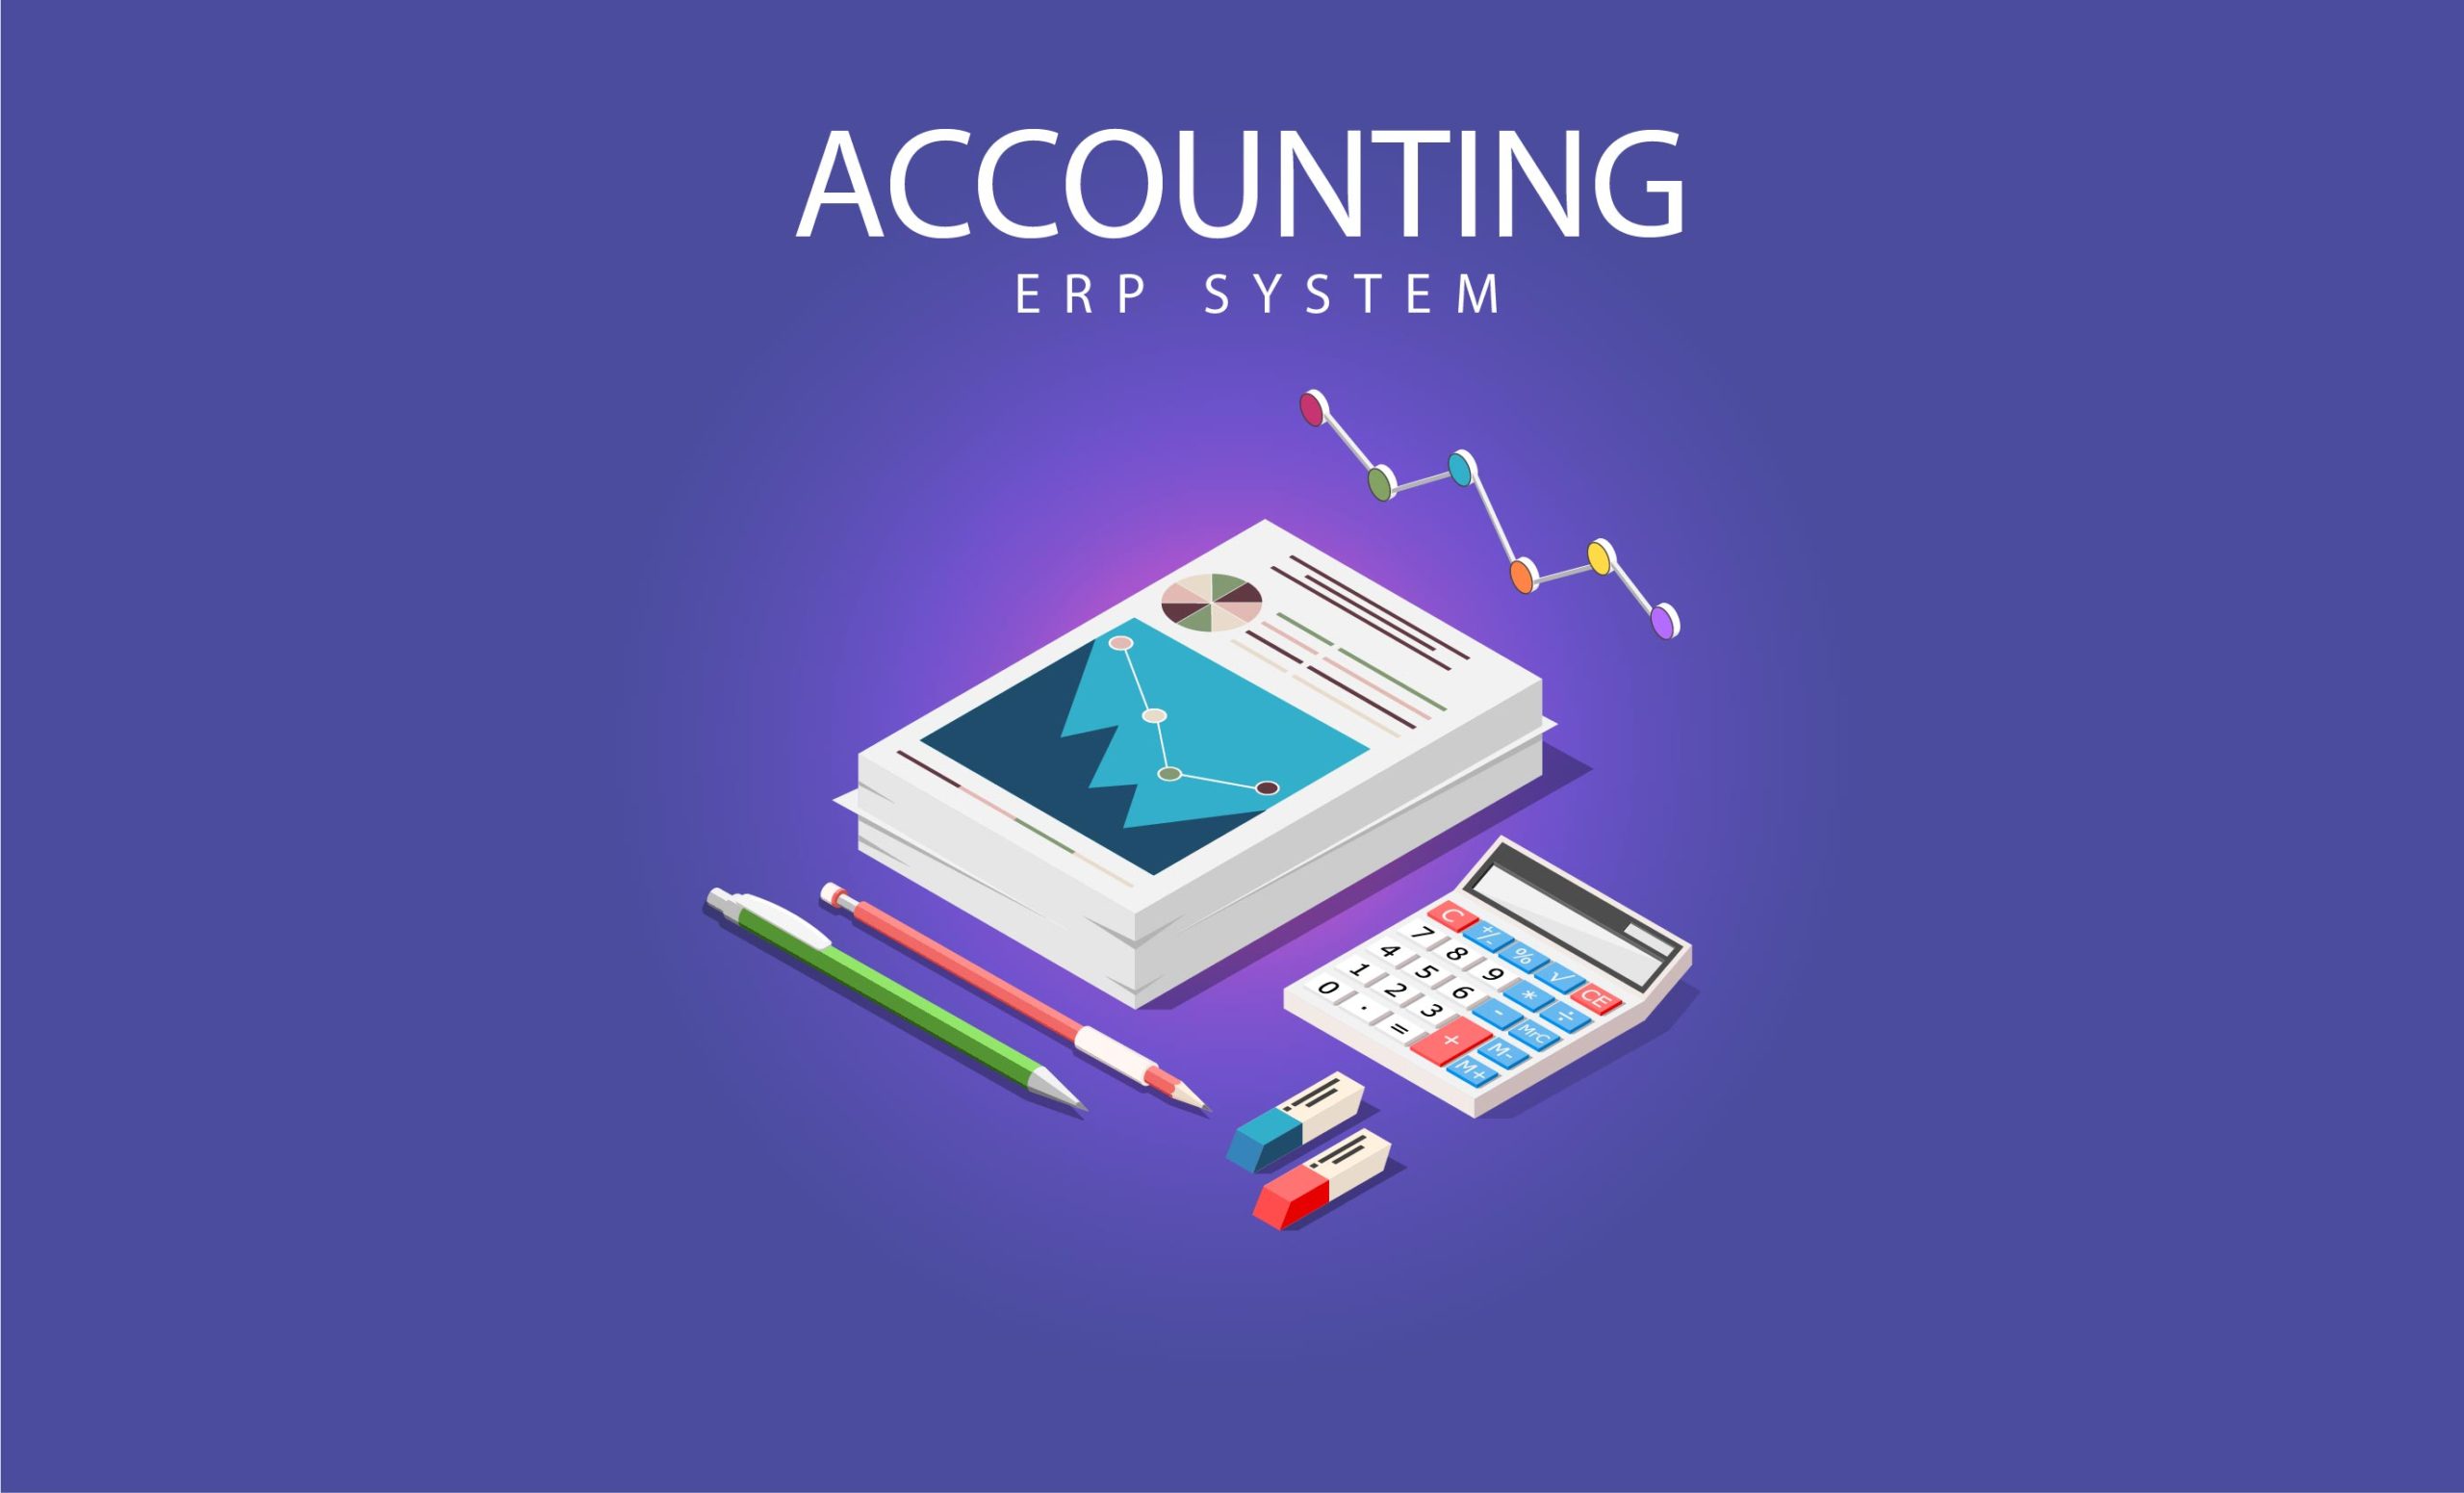 Accounting ERP system